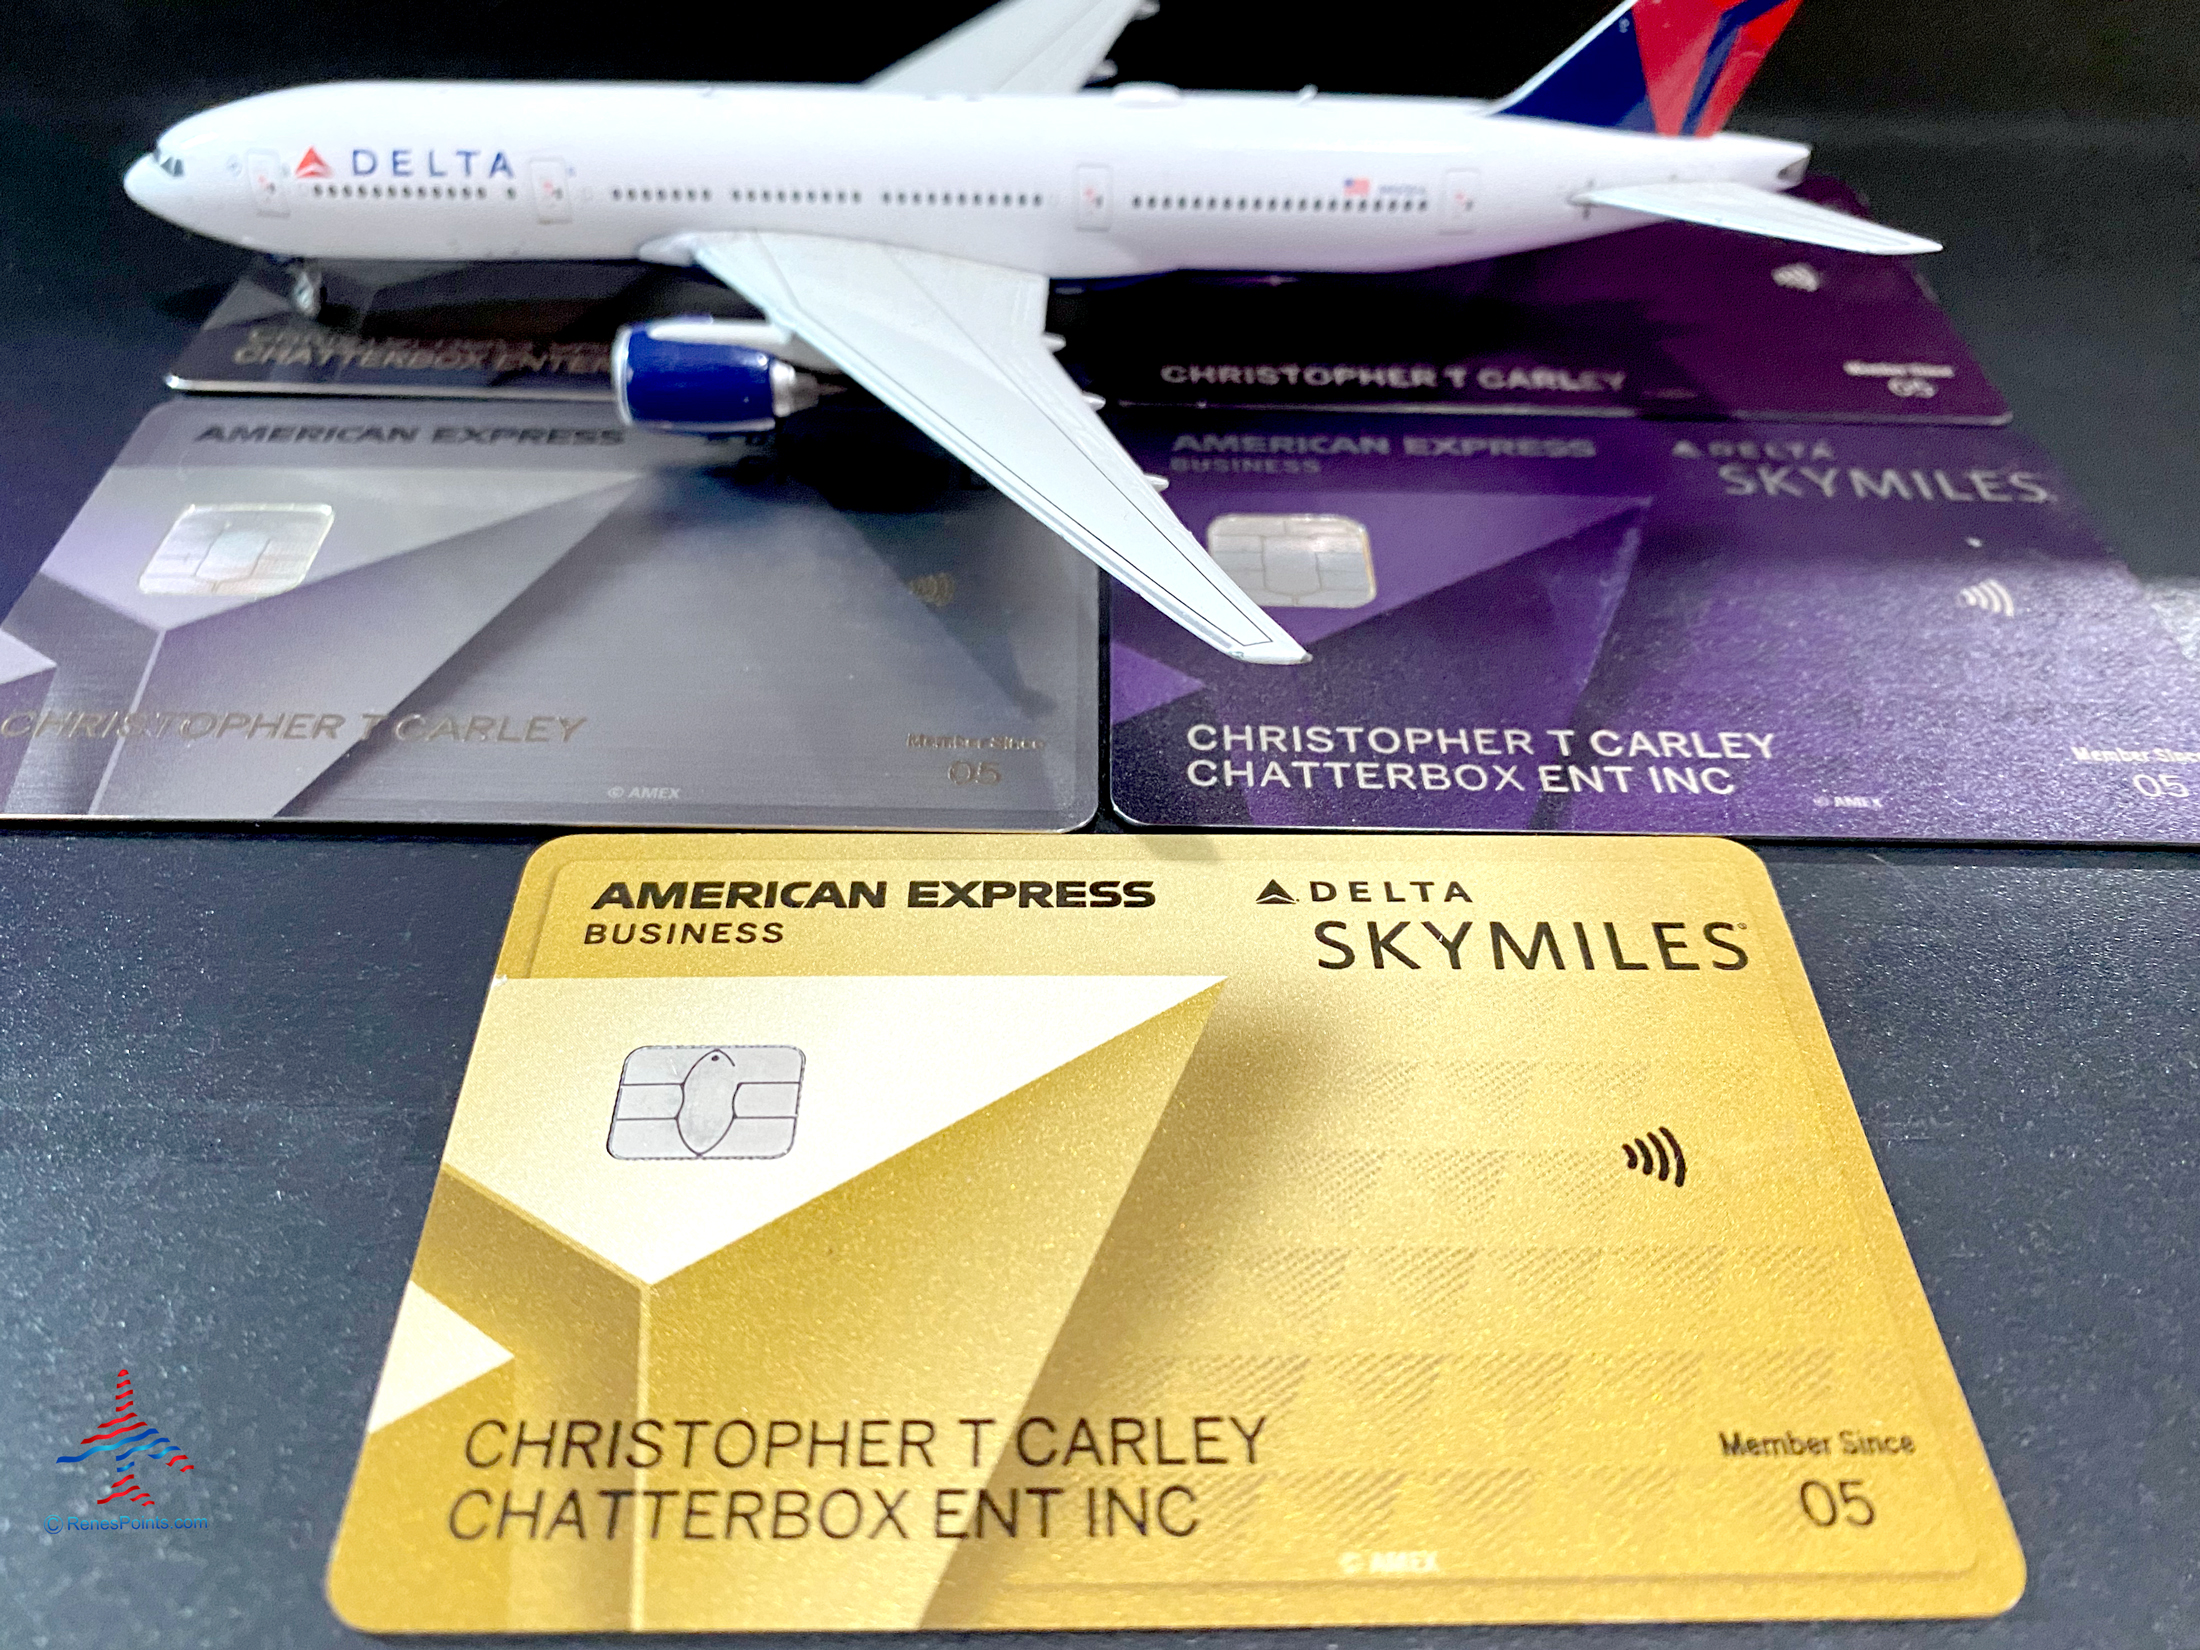 Whoa: Limited Time Delta Amex Offers with Up to 110,000 Bonus SkyMiles - Eye of the Flyer